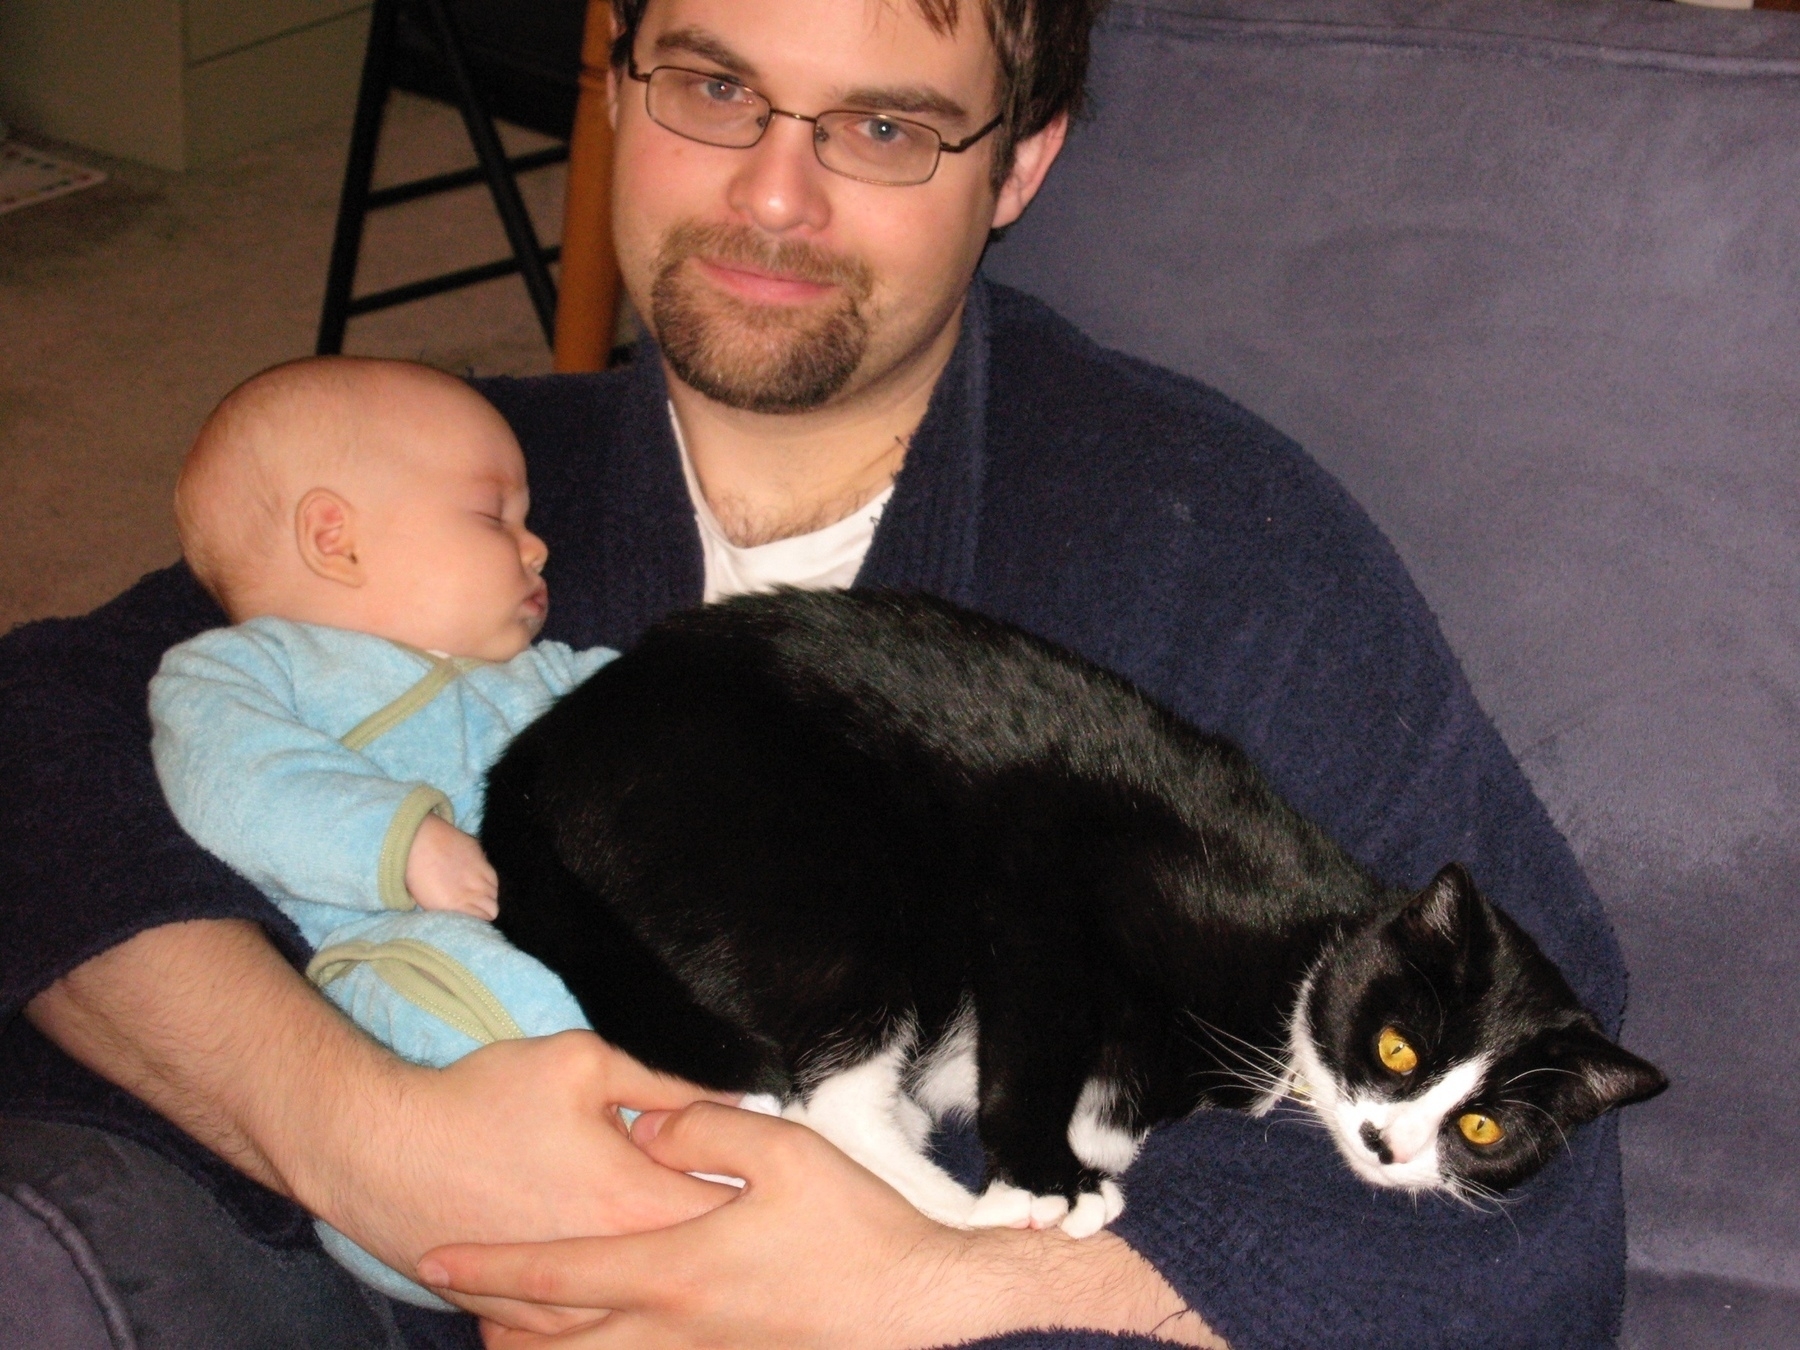 Sam holds an infant while a cat sits on the infant.